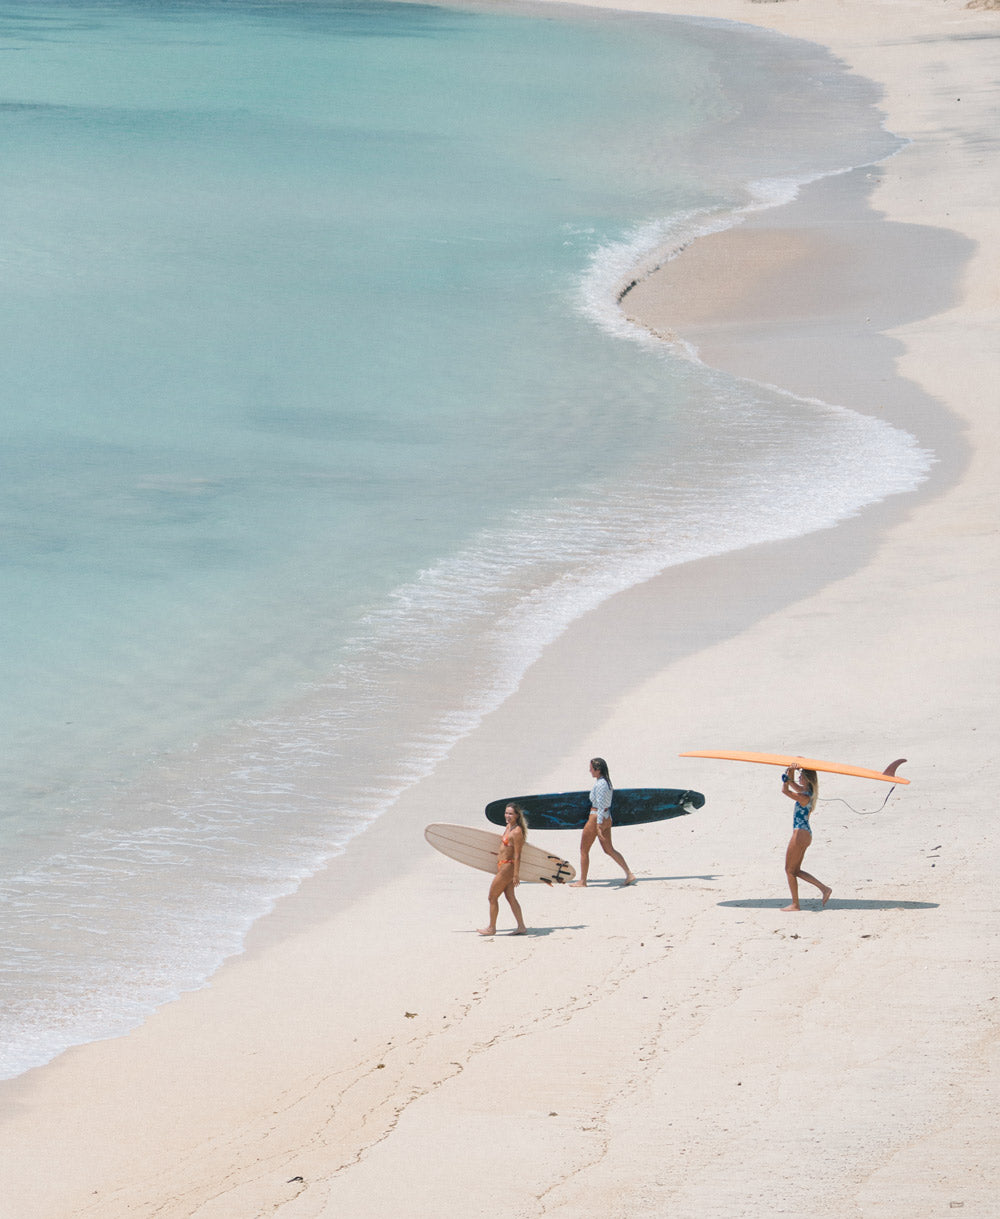 Lombok Surf: Riding the Waves in Paradise